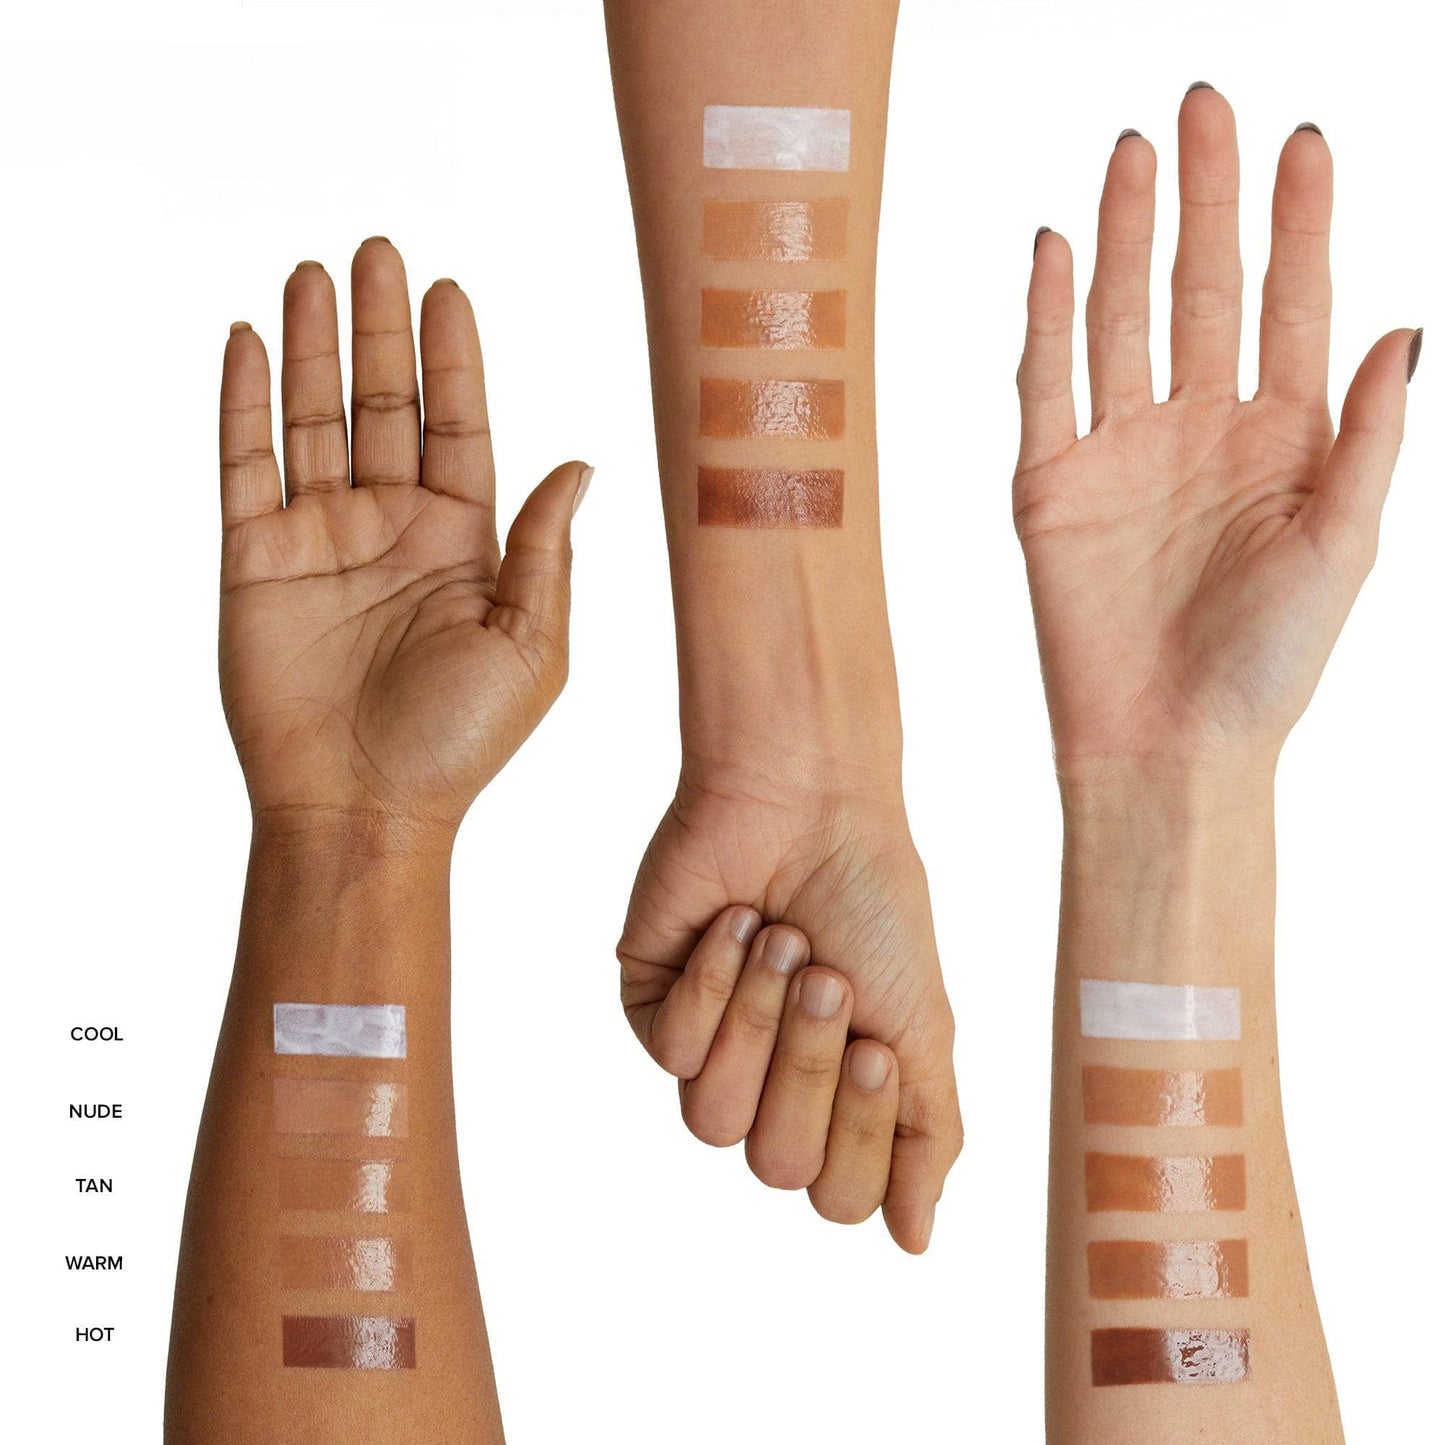 Arms with swatches of Nudescreen Tan